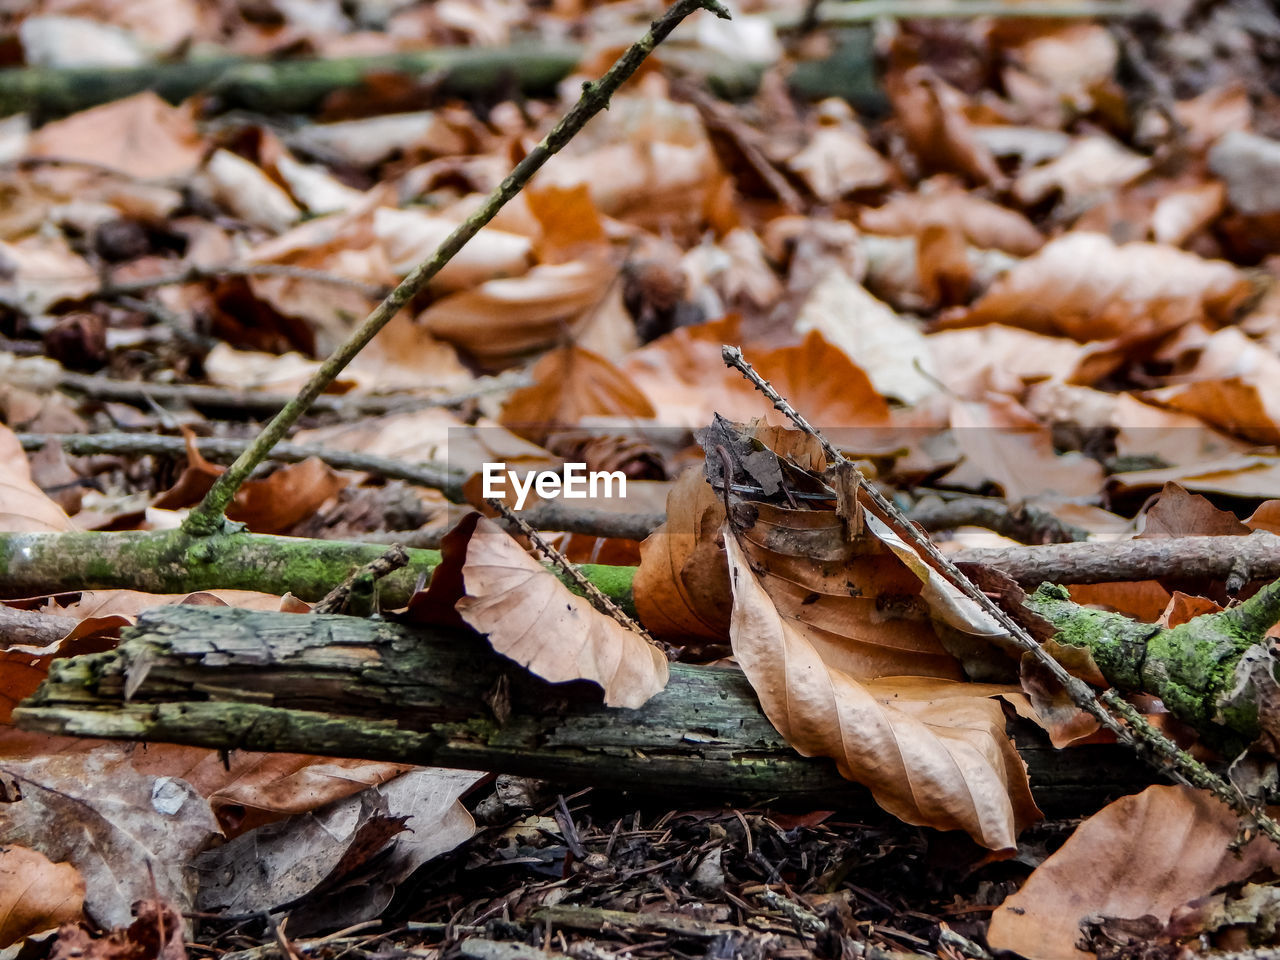 leaf, plant part, nature, dry, autumn, tree, leaves, day, no people, branch, land, falling, plant, field, wood, close-up, fragility, forest, outdoors, beauty in nature, high angle view, brown, focus on foreground, tranquility, soil, abundance